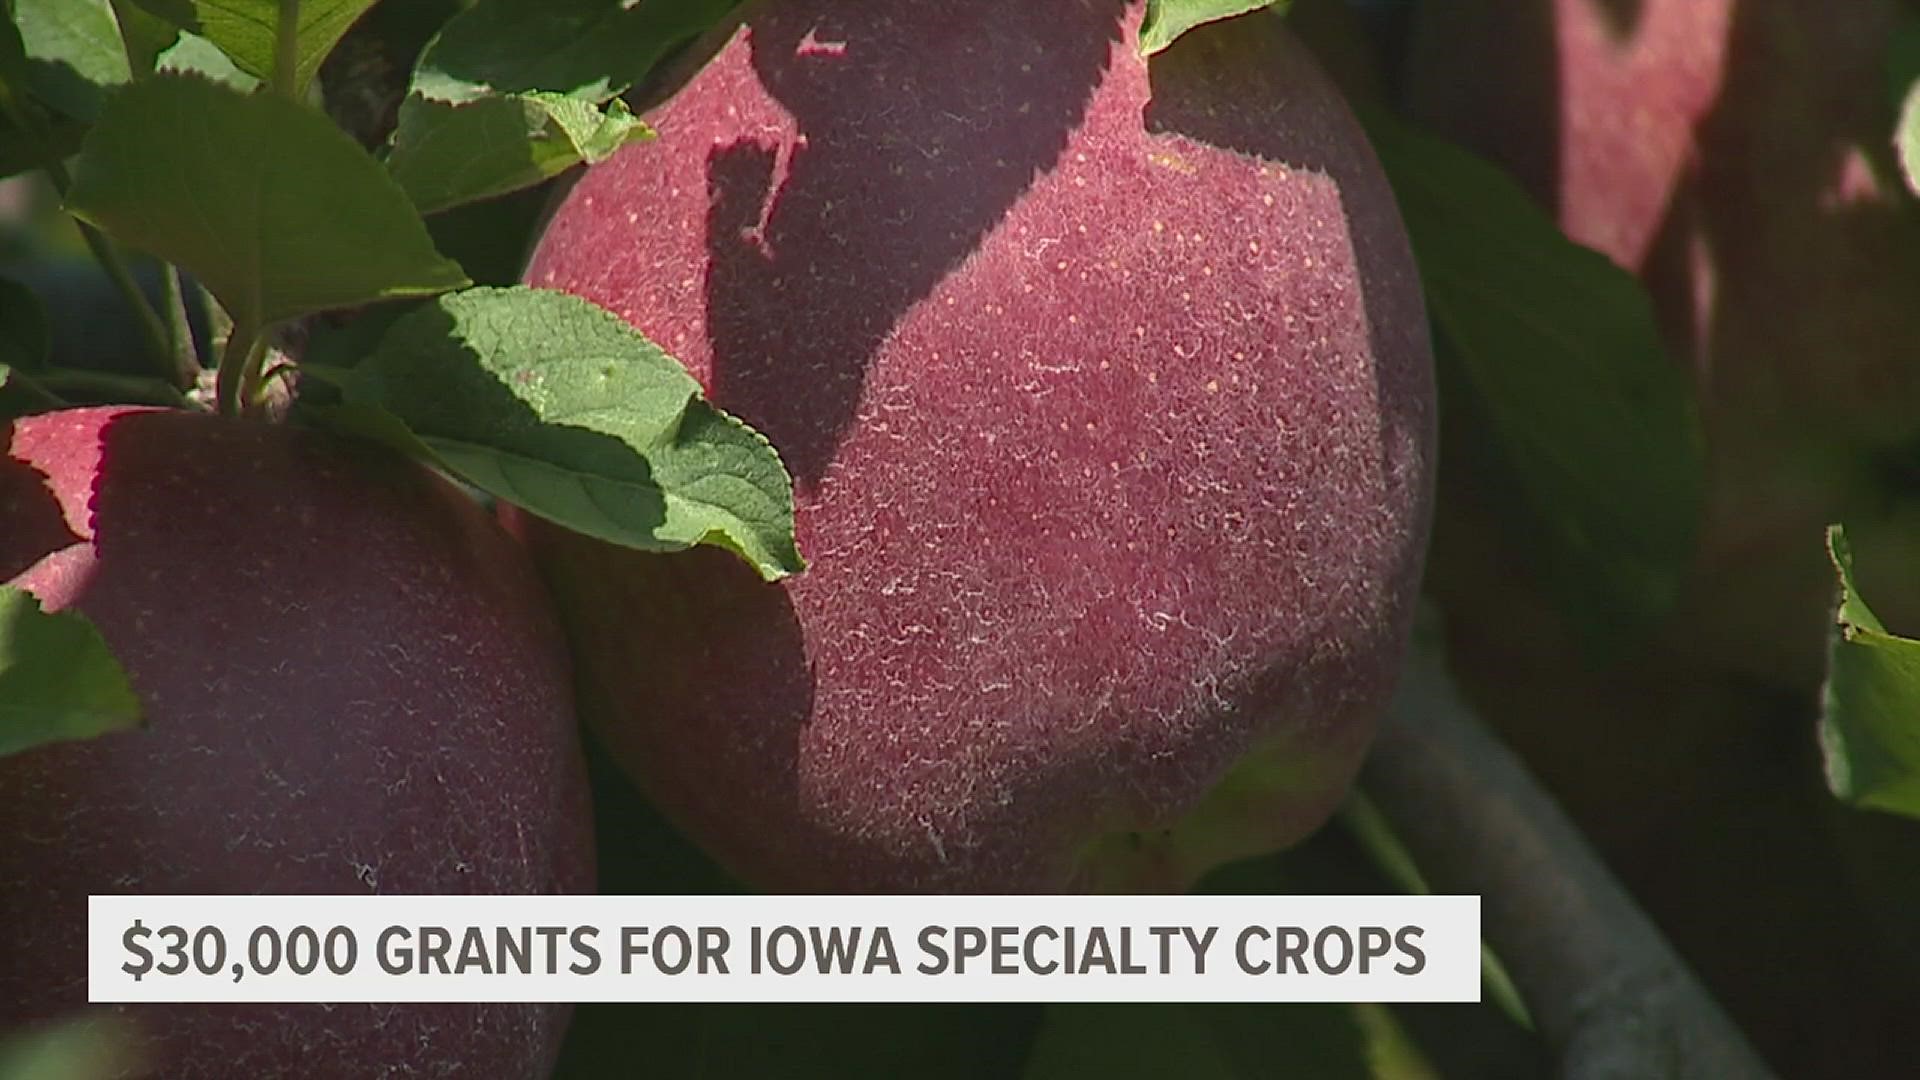 Iowa's specialty crops program is giving up to $30,000 in grants to various state agricultural groups to fund research and farming of specialty crops.